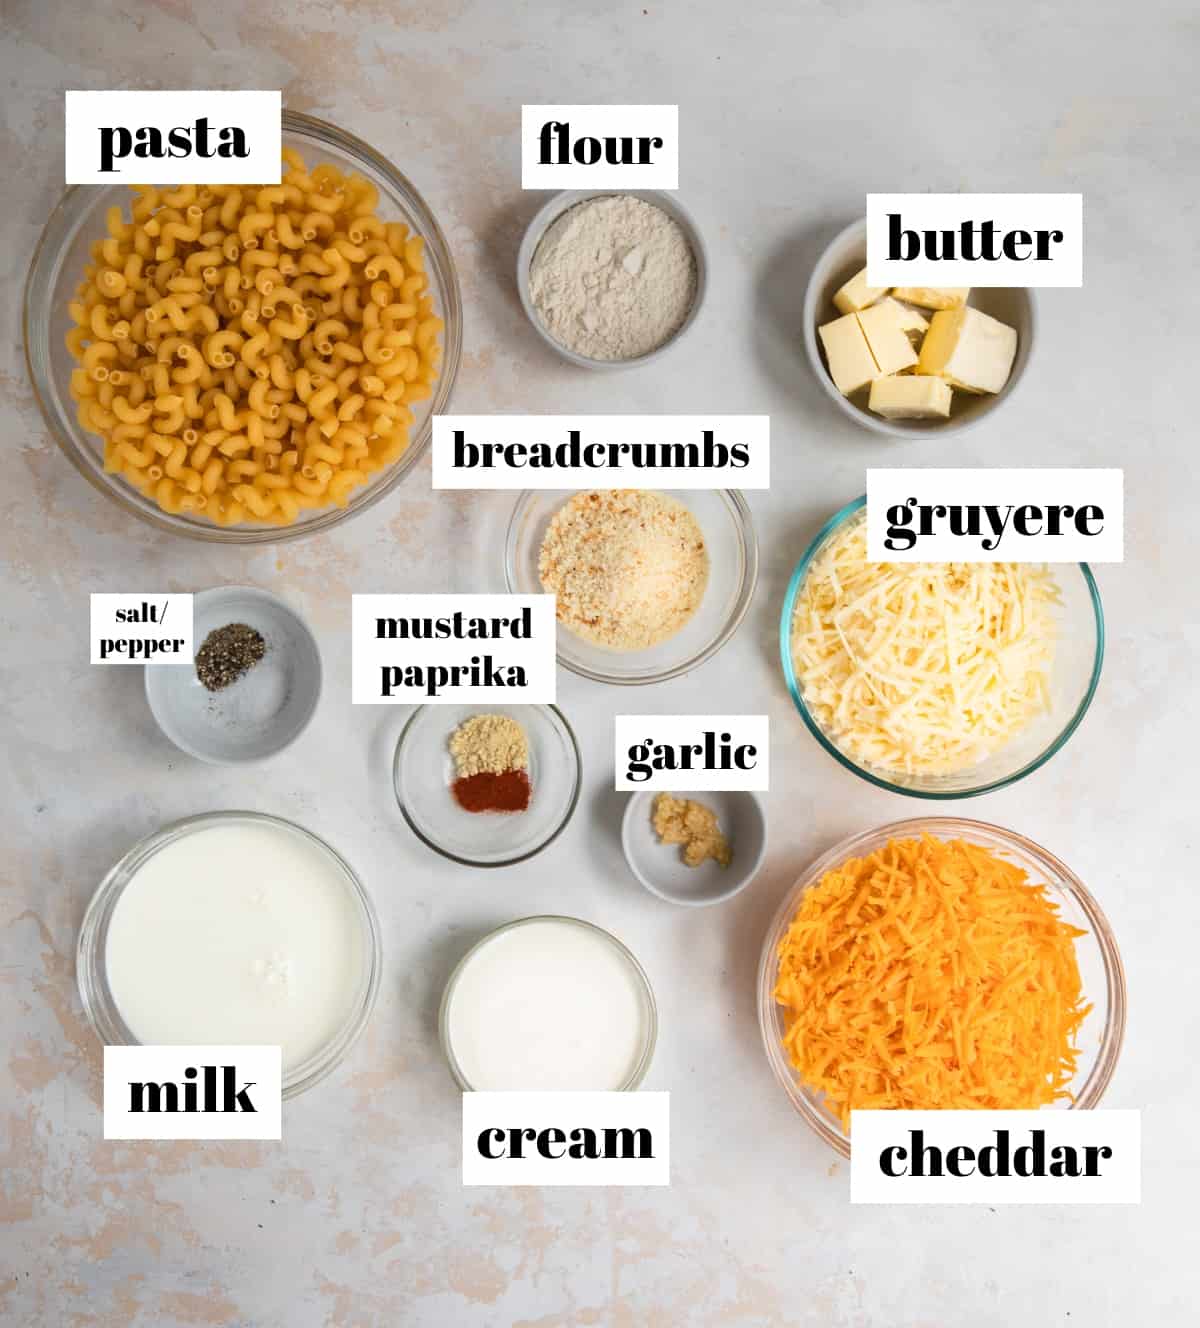 Pasta, flour, milk, cream, butter and other ingredients labeled on counter.